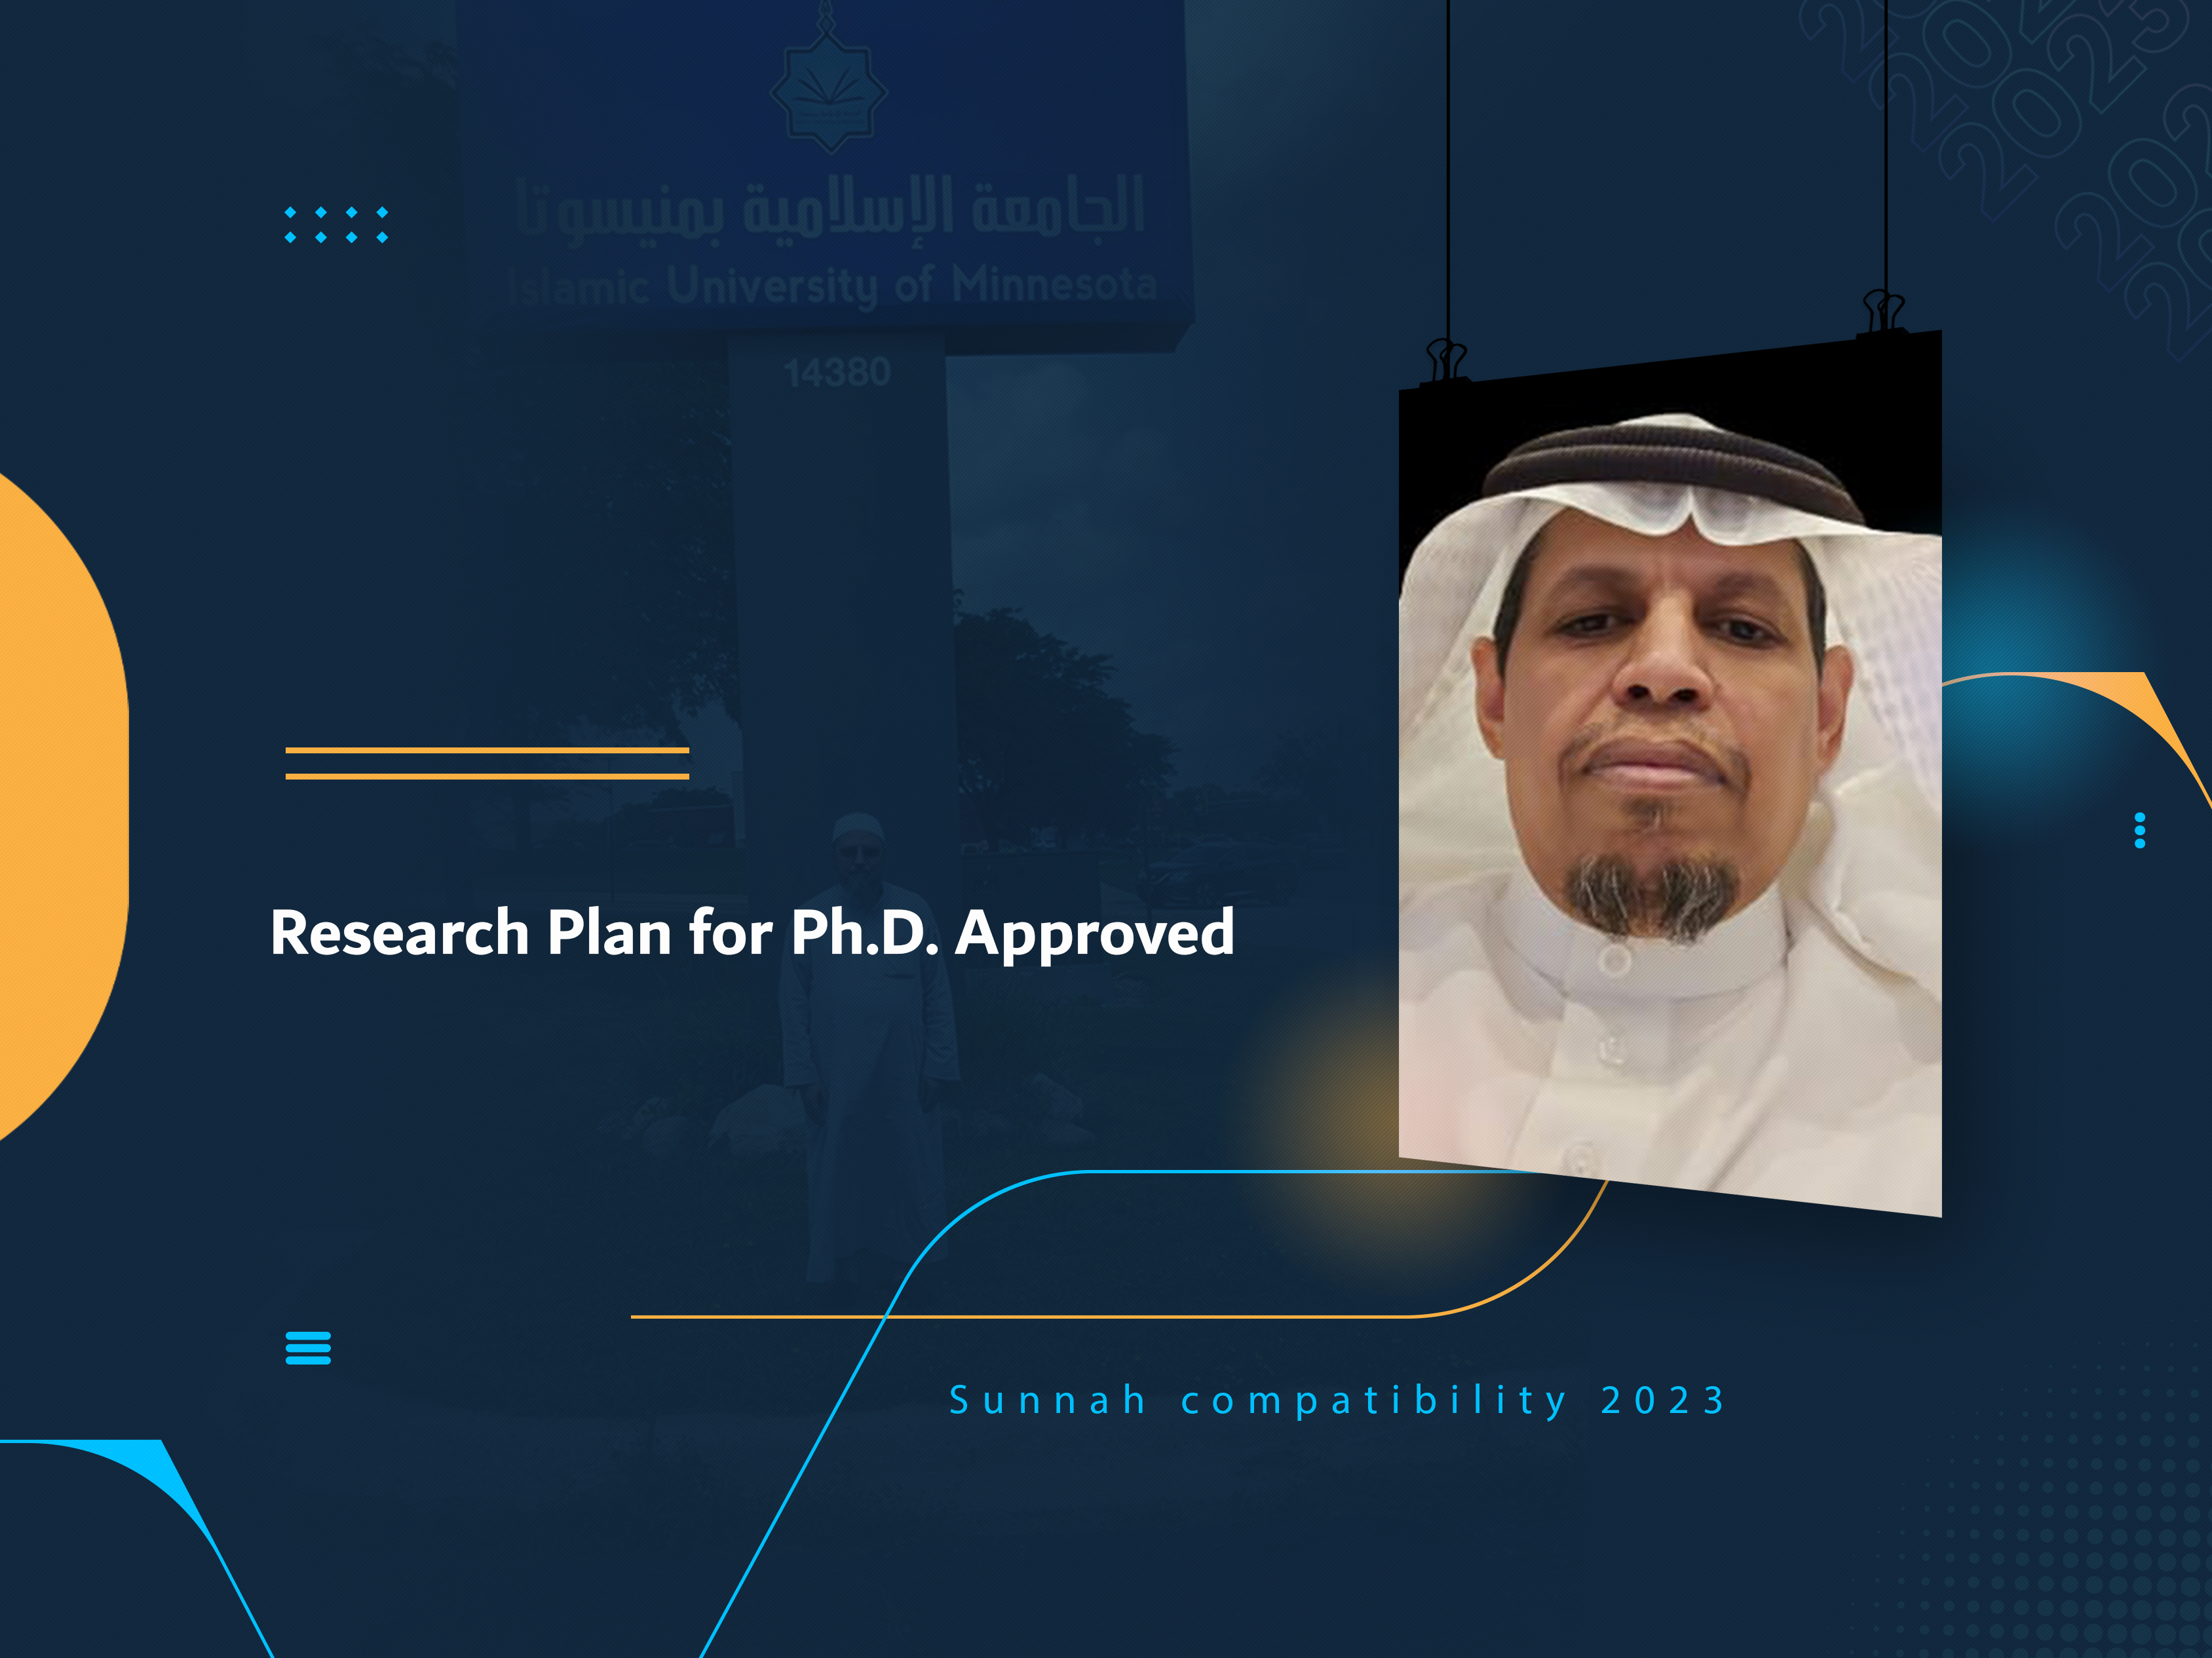 Research Plan for Ph.D. Approved